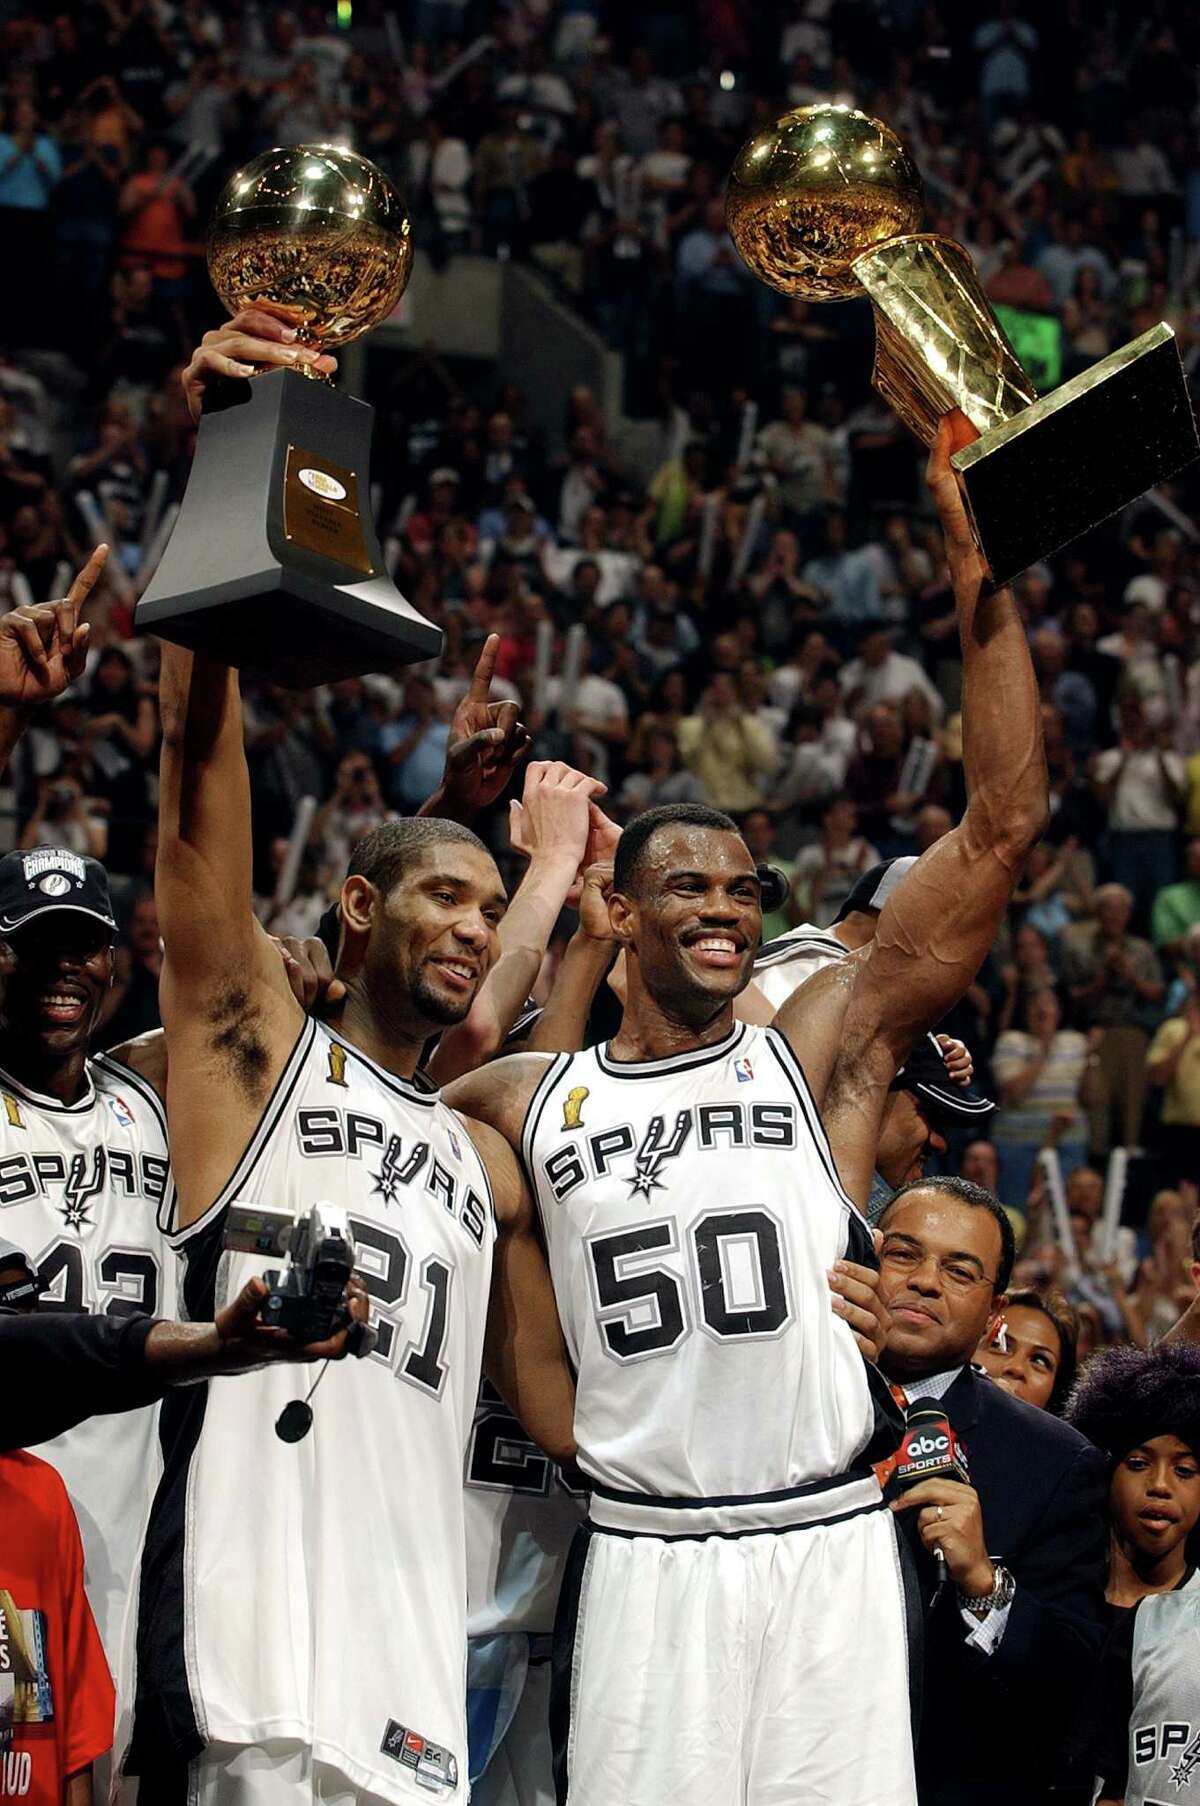 Spurs stars Tim Duncan, with the MVP trophy, and David Robinson, with Larry O’Brien championship trophy, celebrate their NBAcChampionship after Game 6 of the NBA Finals at the SBC Center in San Antonio on June 15, 2003.